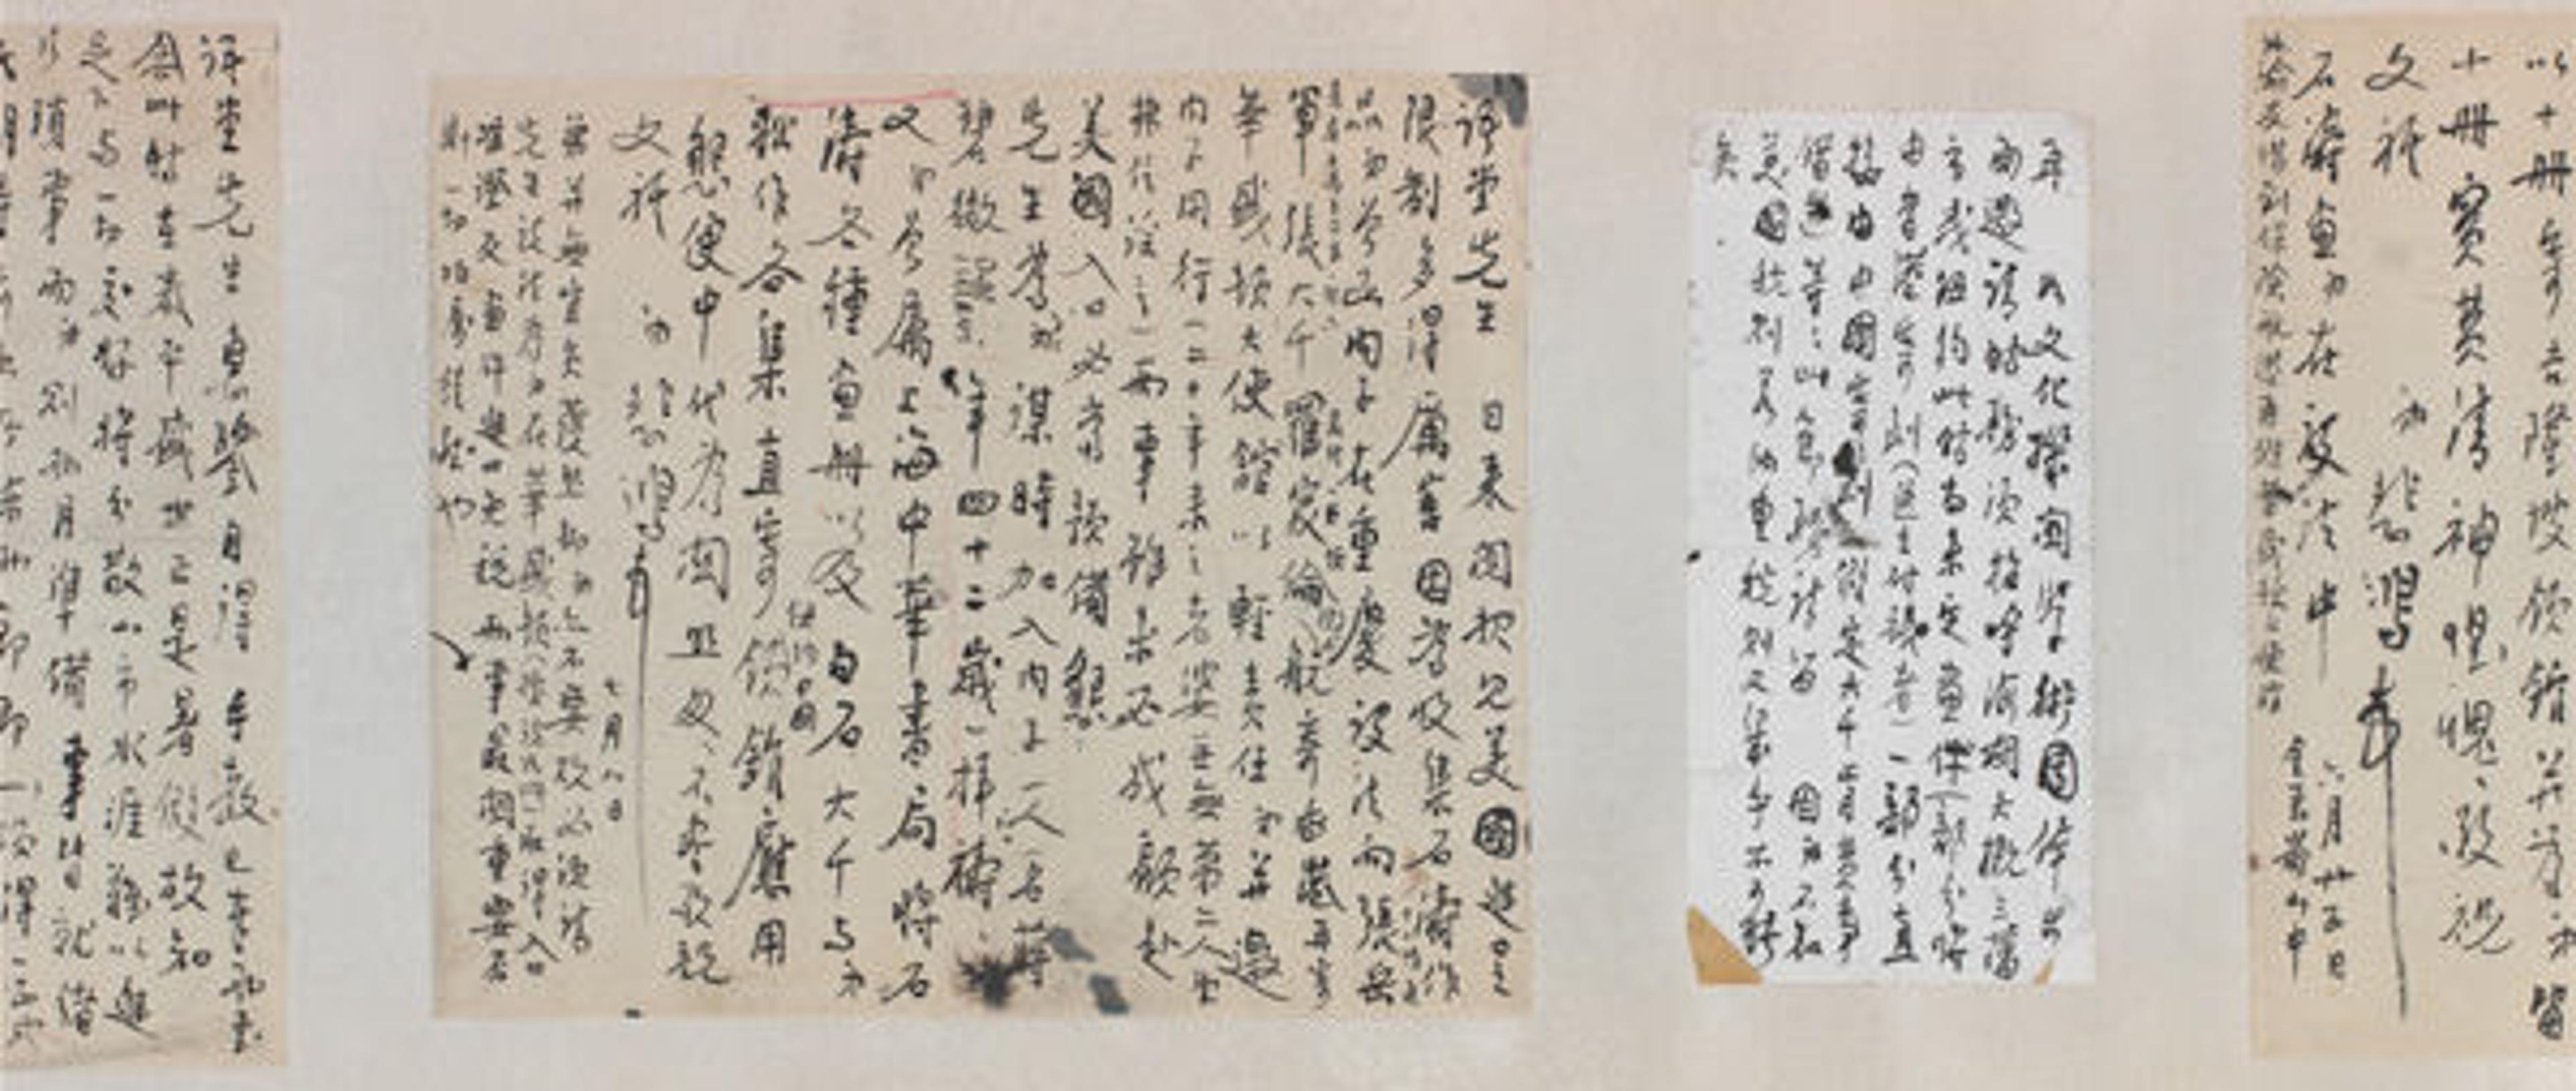  Xu Beihong (1895–1953). Seventeen Letters, datable to 1938–48.  Handscroll, ink on paper, 12 11/16 x 365 3/8 in. (32.3 x 928.0 cm). The Lin Yutang Family Collection, Gift of Richard M. Lai, Jill Lai Miller, and Larry C. Y. Lai in memory of Taiyi Lin Lai (2005.509.12). Section of Letters nos. 4-7.